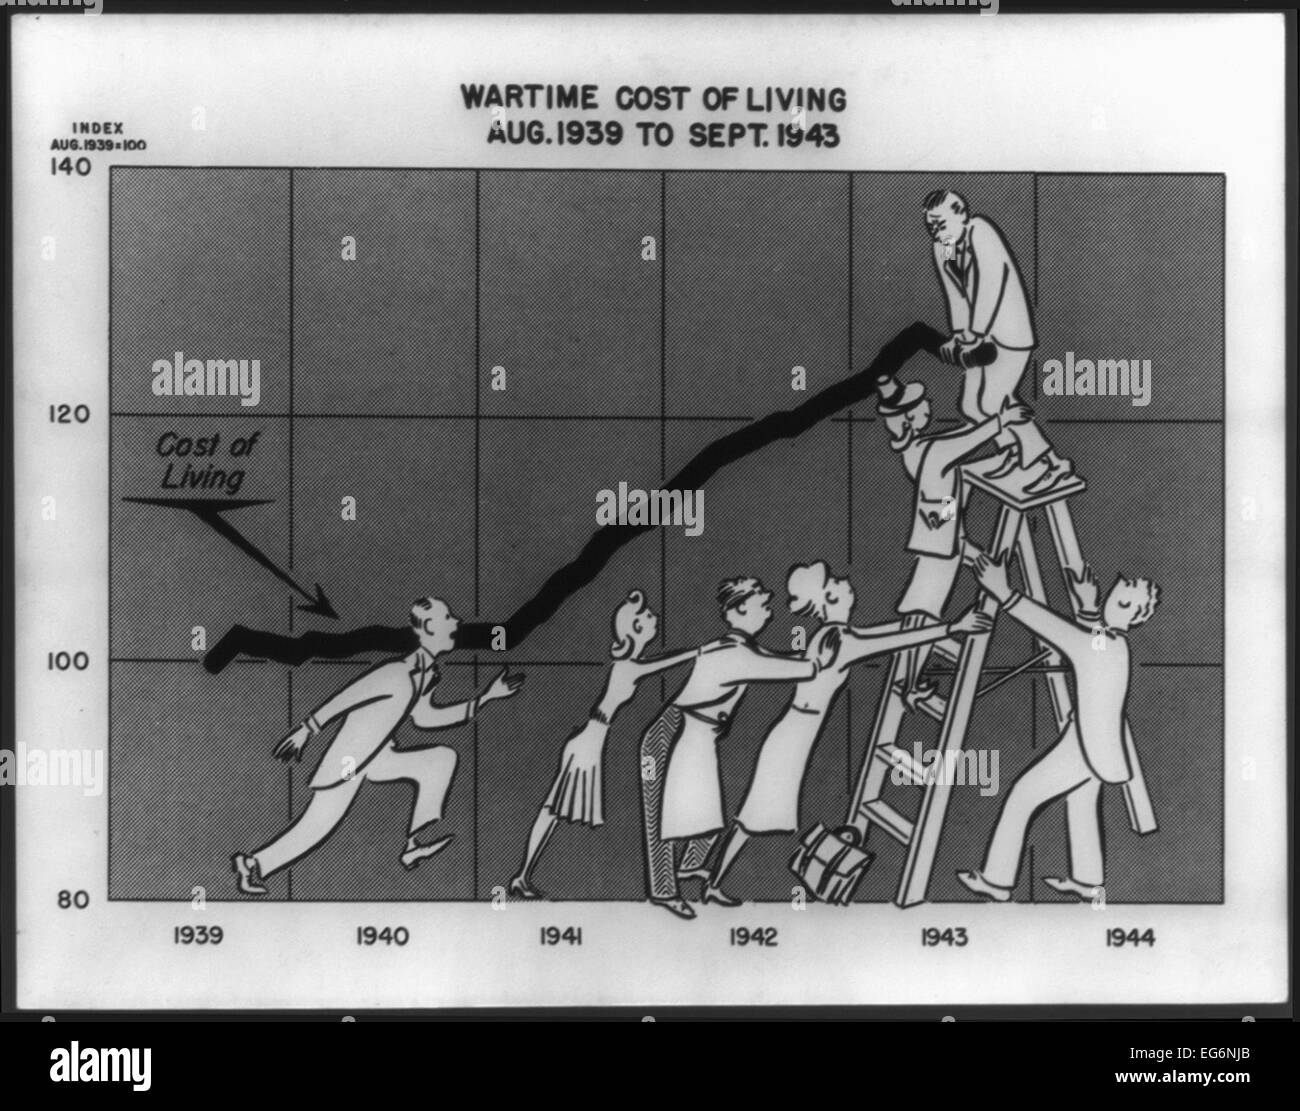 U.S. wartime cost of living, Aug. 1939 to Sept. 1943. Cartoon shows men and women on a graph trying to physically hold down the Stock Photo